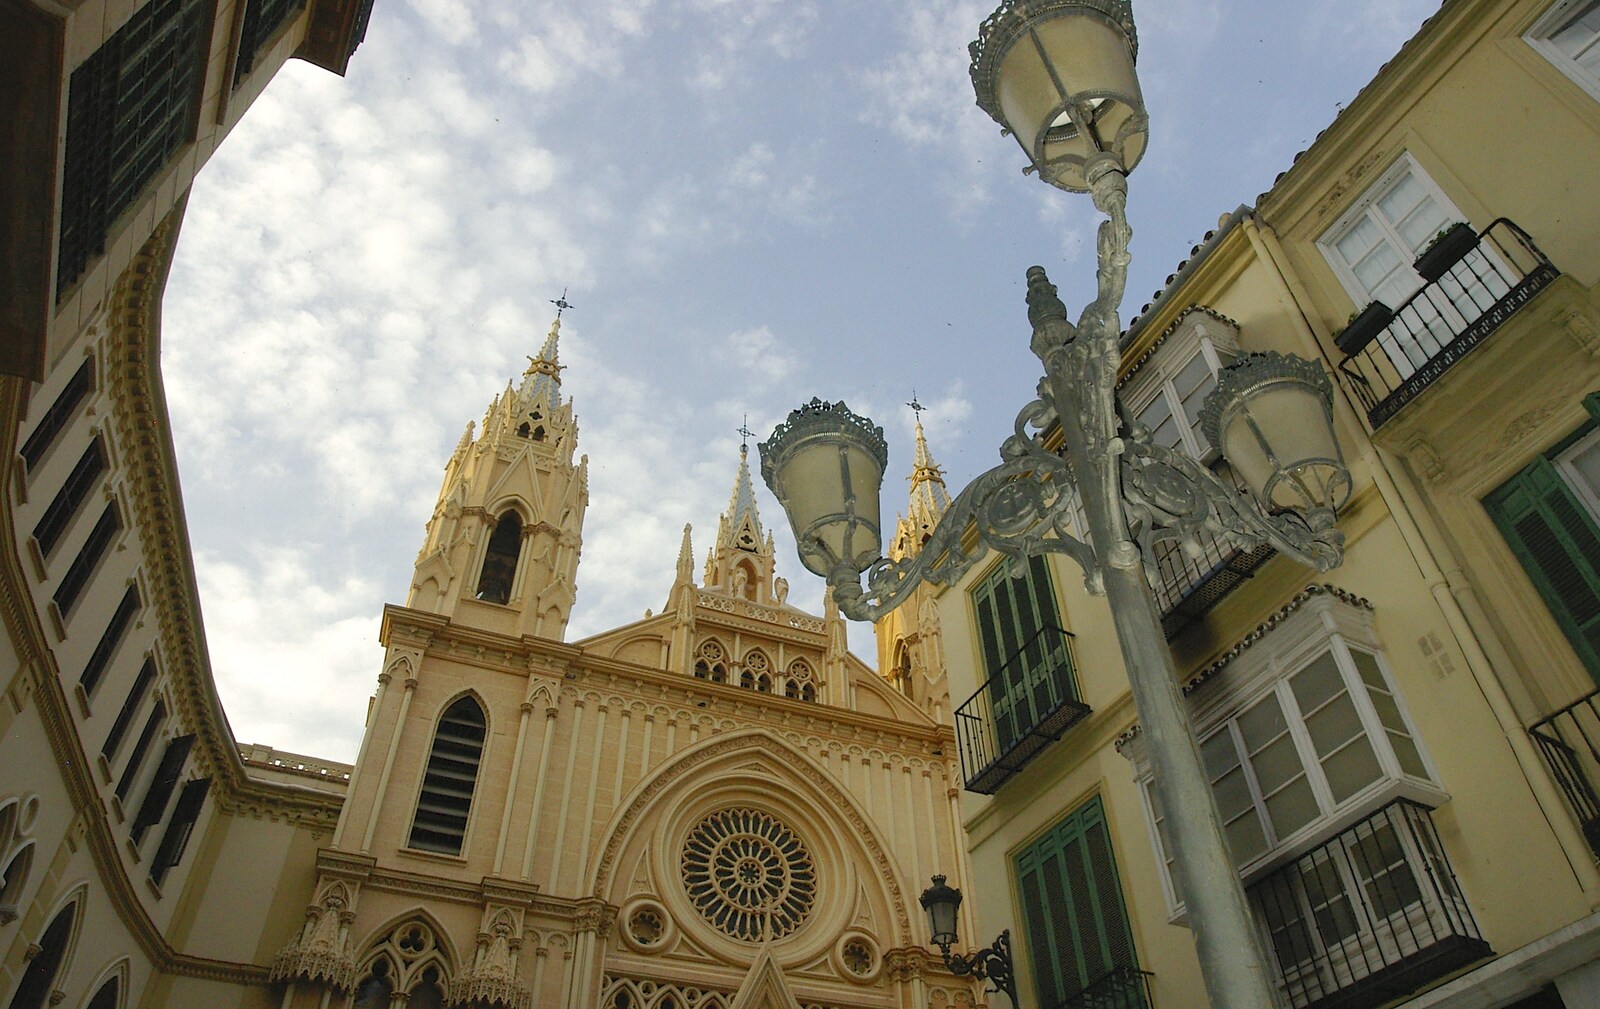 Streetlight and church from Working at Telefónica, Malaga, Spain - 6th June 2006